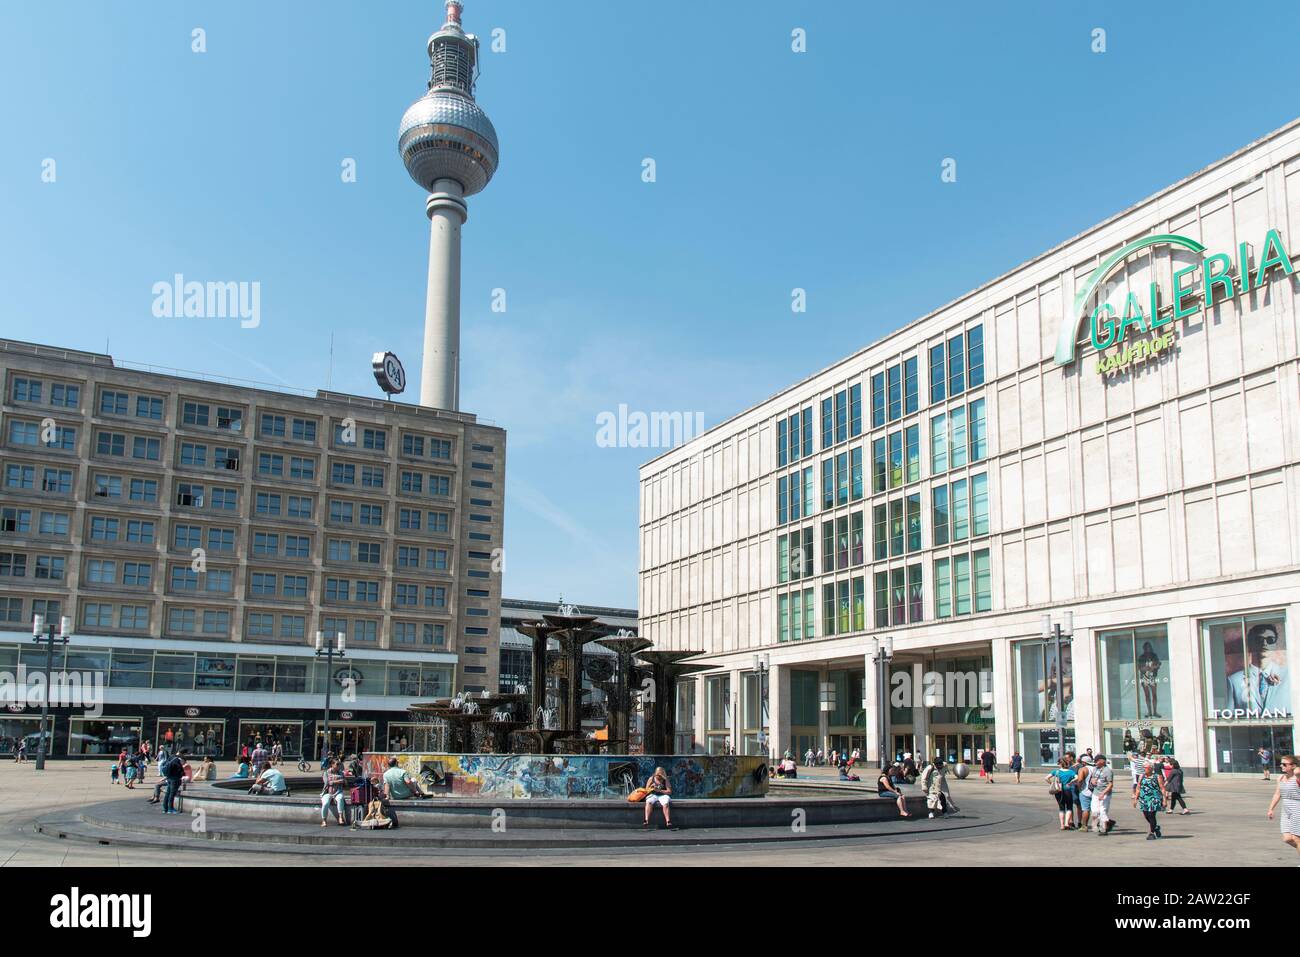 BERLIN, GERMANY - MAY 28, 2018: A view of the Alexanderplatz square, with the Brunnen der Volkerfreundschaft fountain in the center and the popular Te Stock Photo